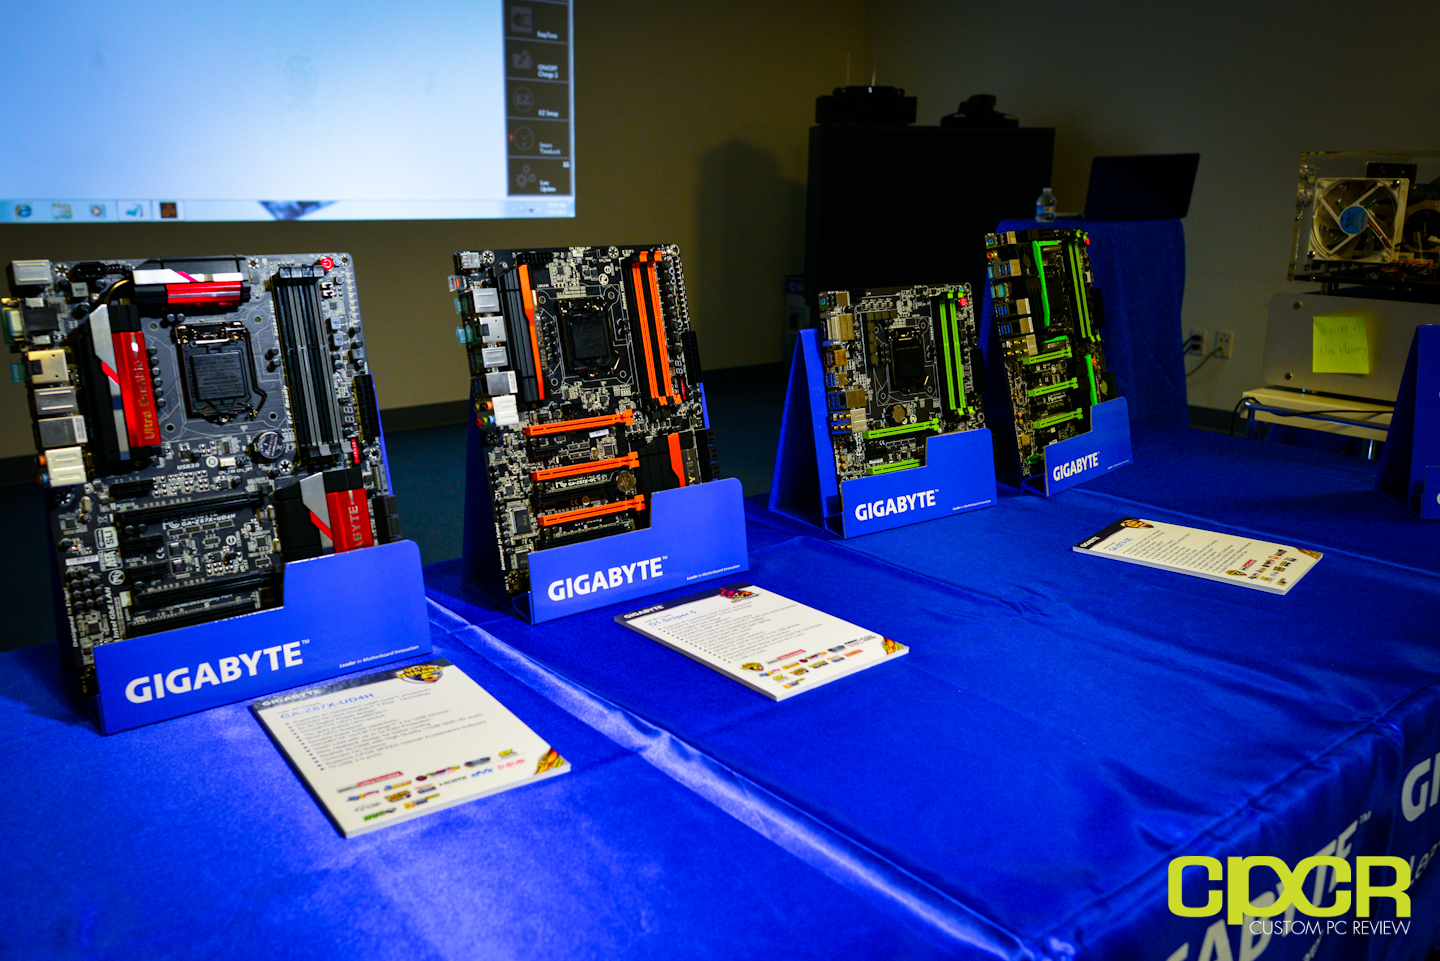 Gigabyte Z87 Motherboard Lineup Preview